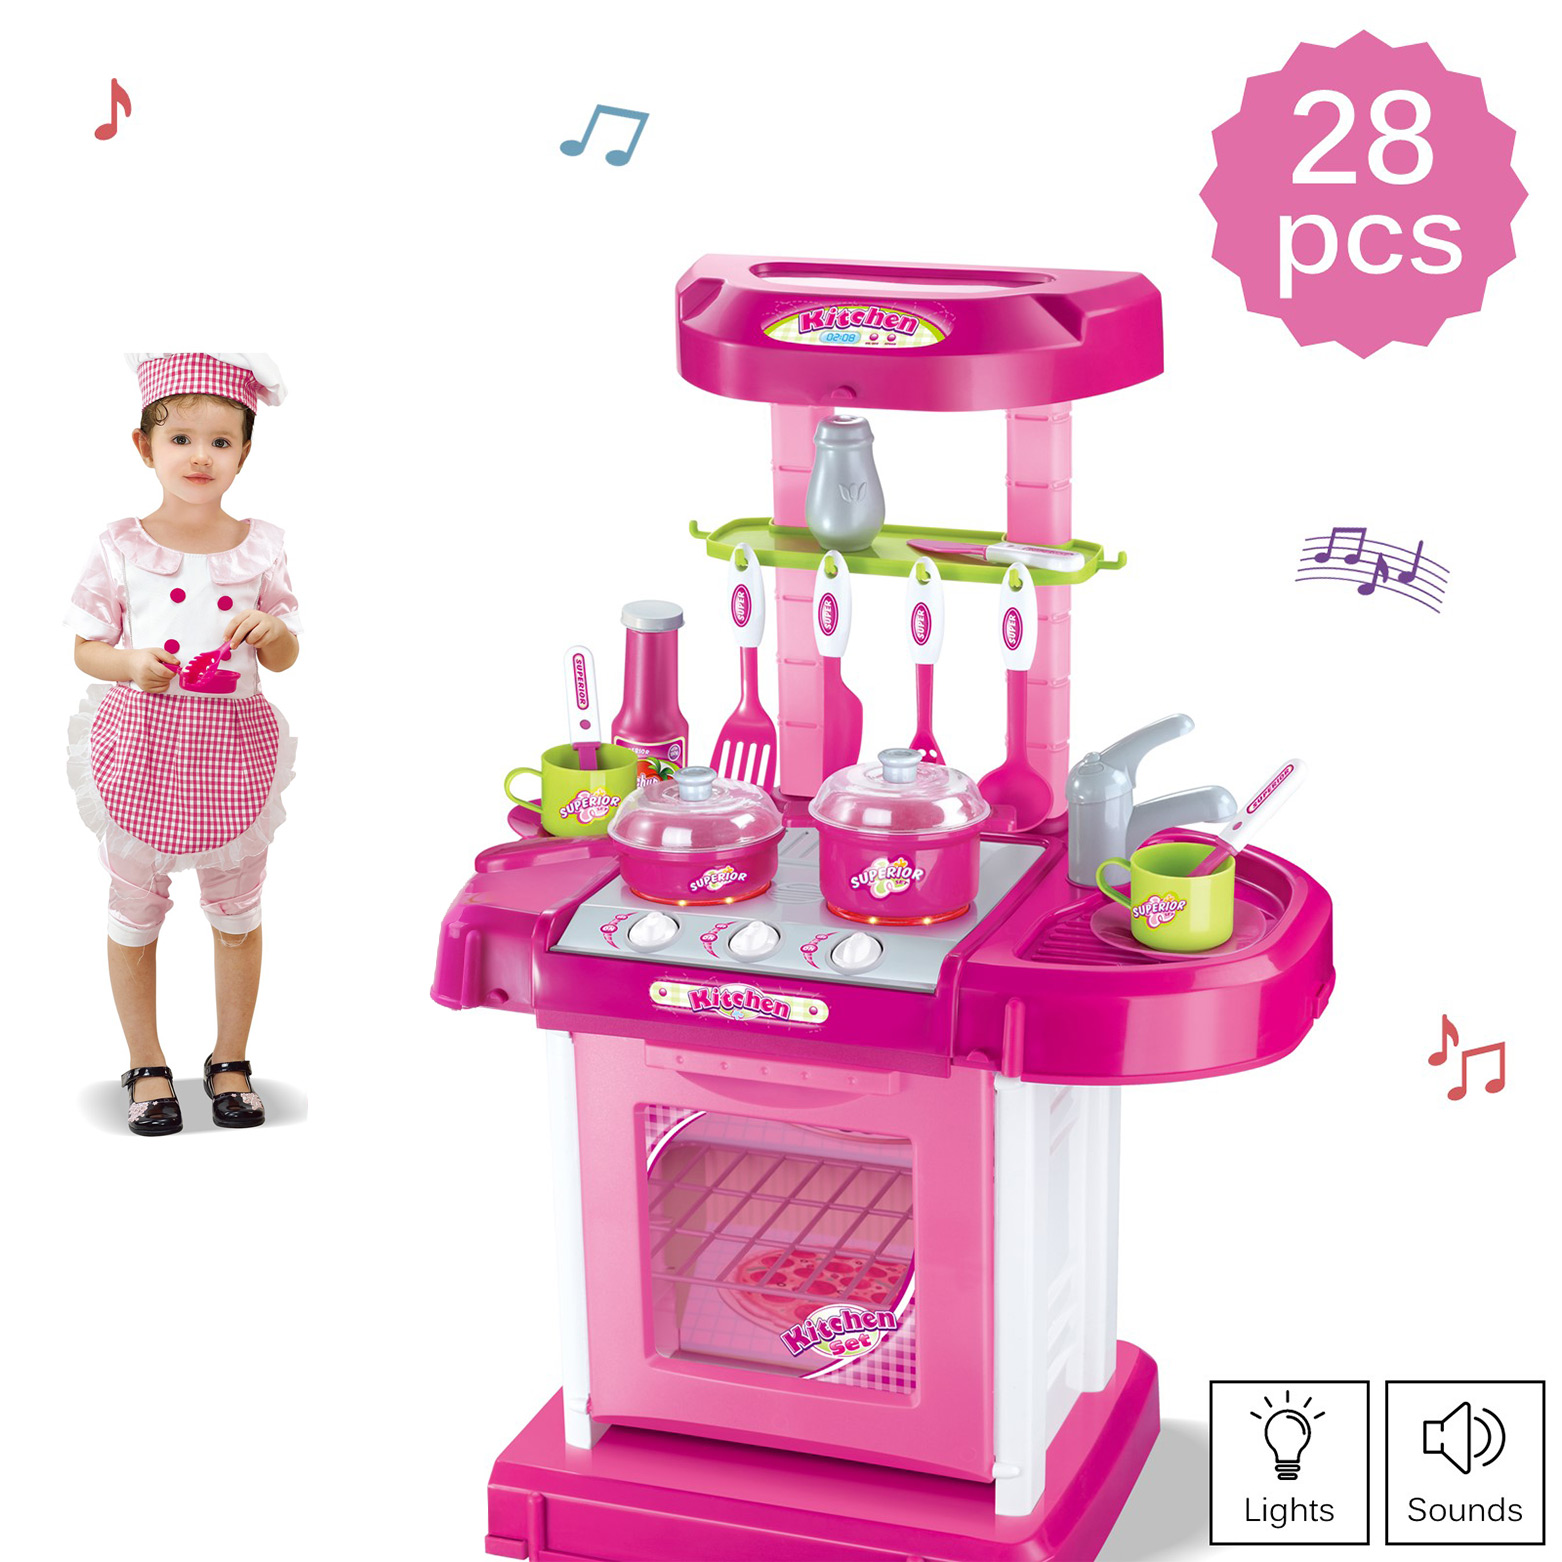 Deluxe Toy Kitchen Playset 2 Feet Tall With Pots Oven Stove Sink Appliances Sounds And Lights Kids Pretend Play Perfect Gift For Early Learning Educational Preschool Girls Boys Cooking